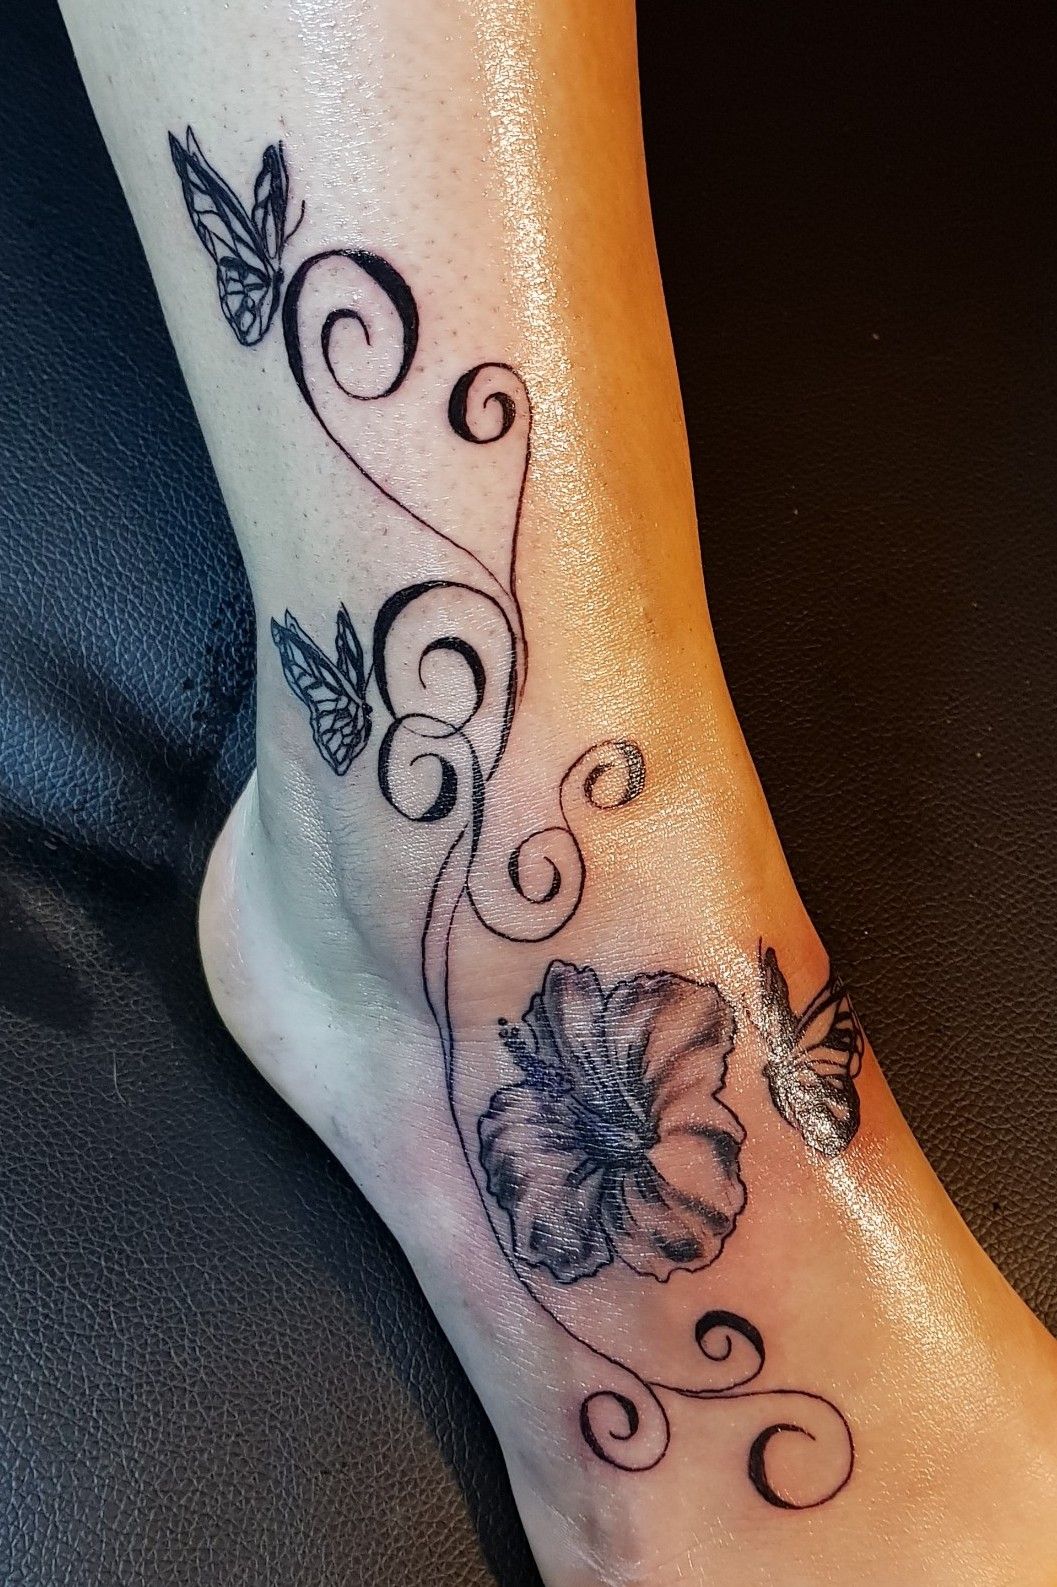 MidPacific Tattoo Lahaina  Tattoo by kaibknight at  midpacifictattookihei Click the link in bio or call 8088751500 to set  up an appointment We do book up quickly Be sure to reach out